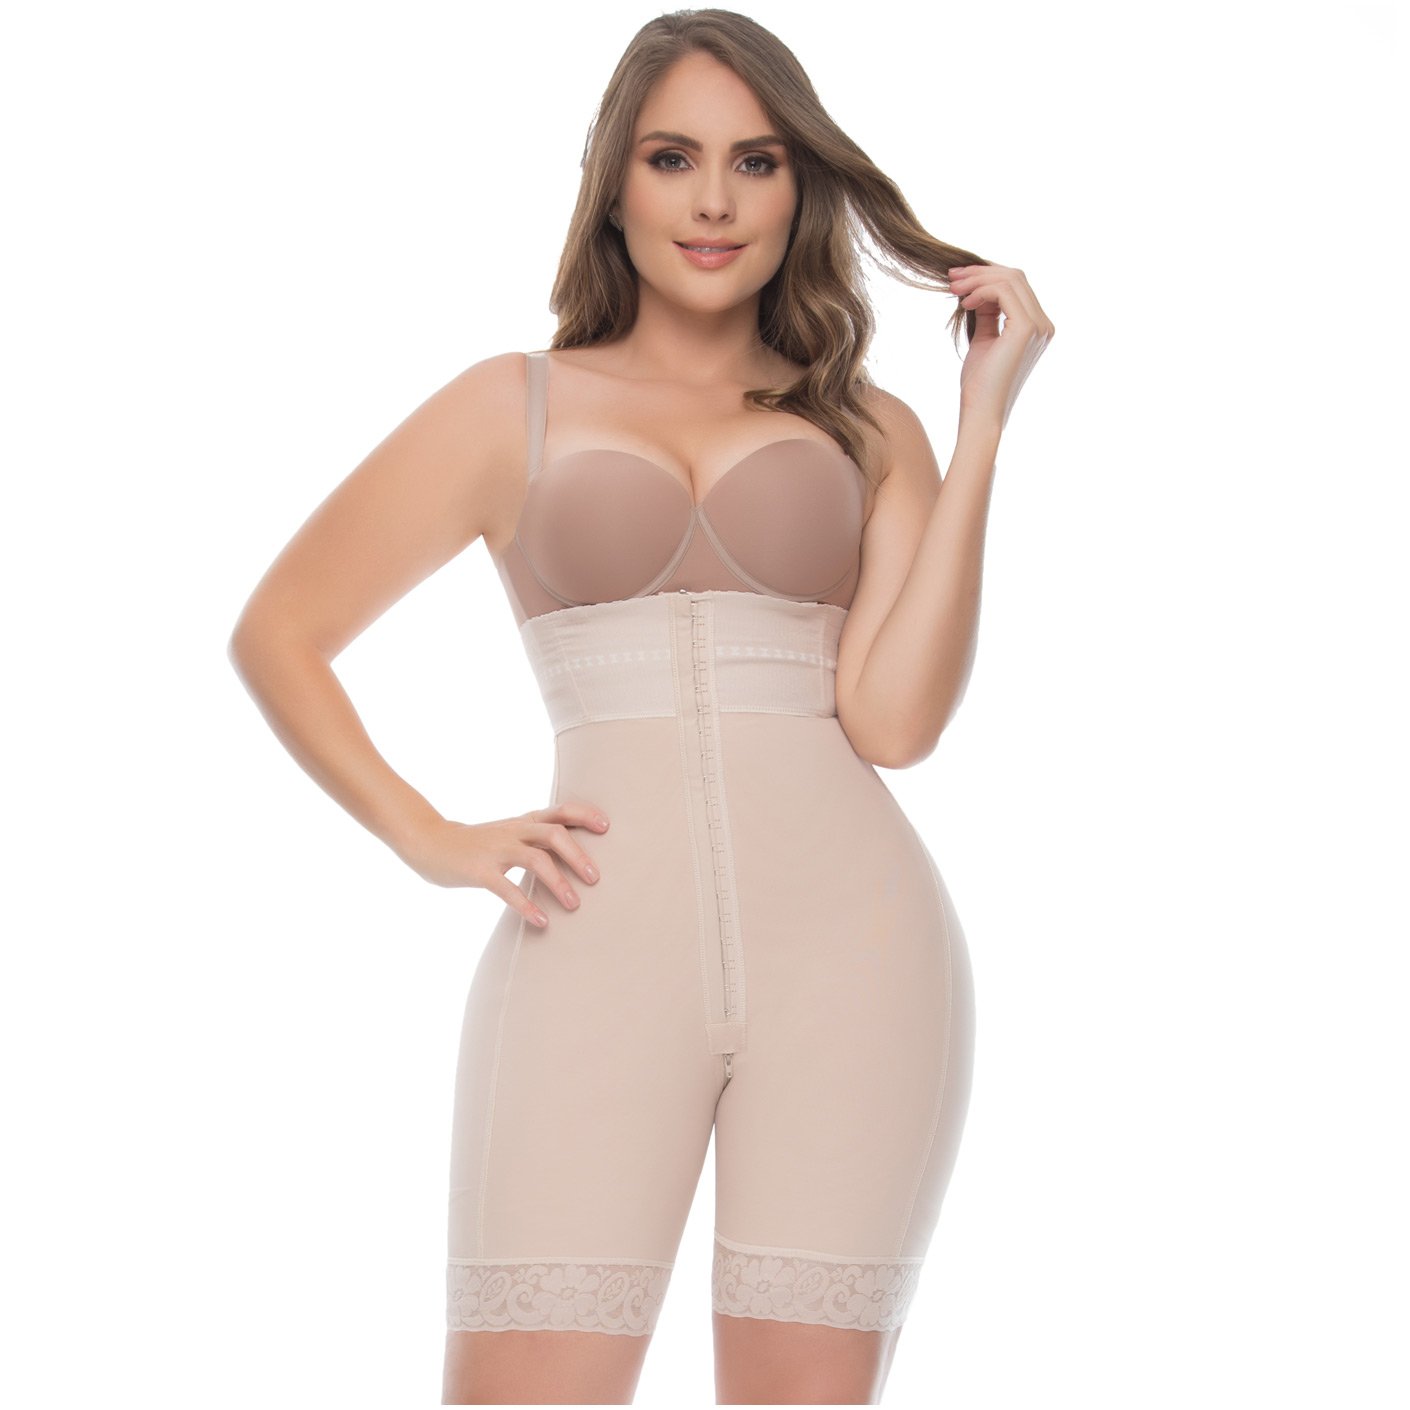 The Ultimate High Compression Shapewear Solution